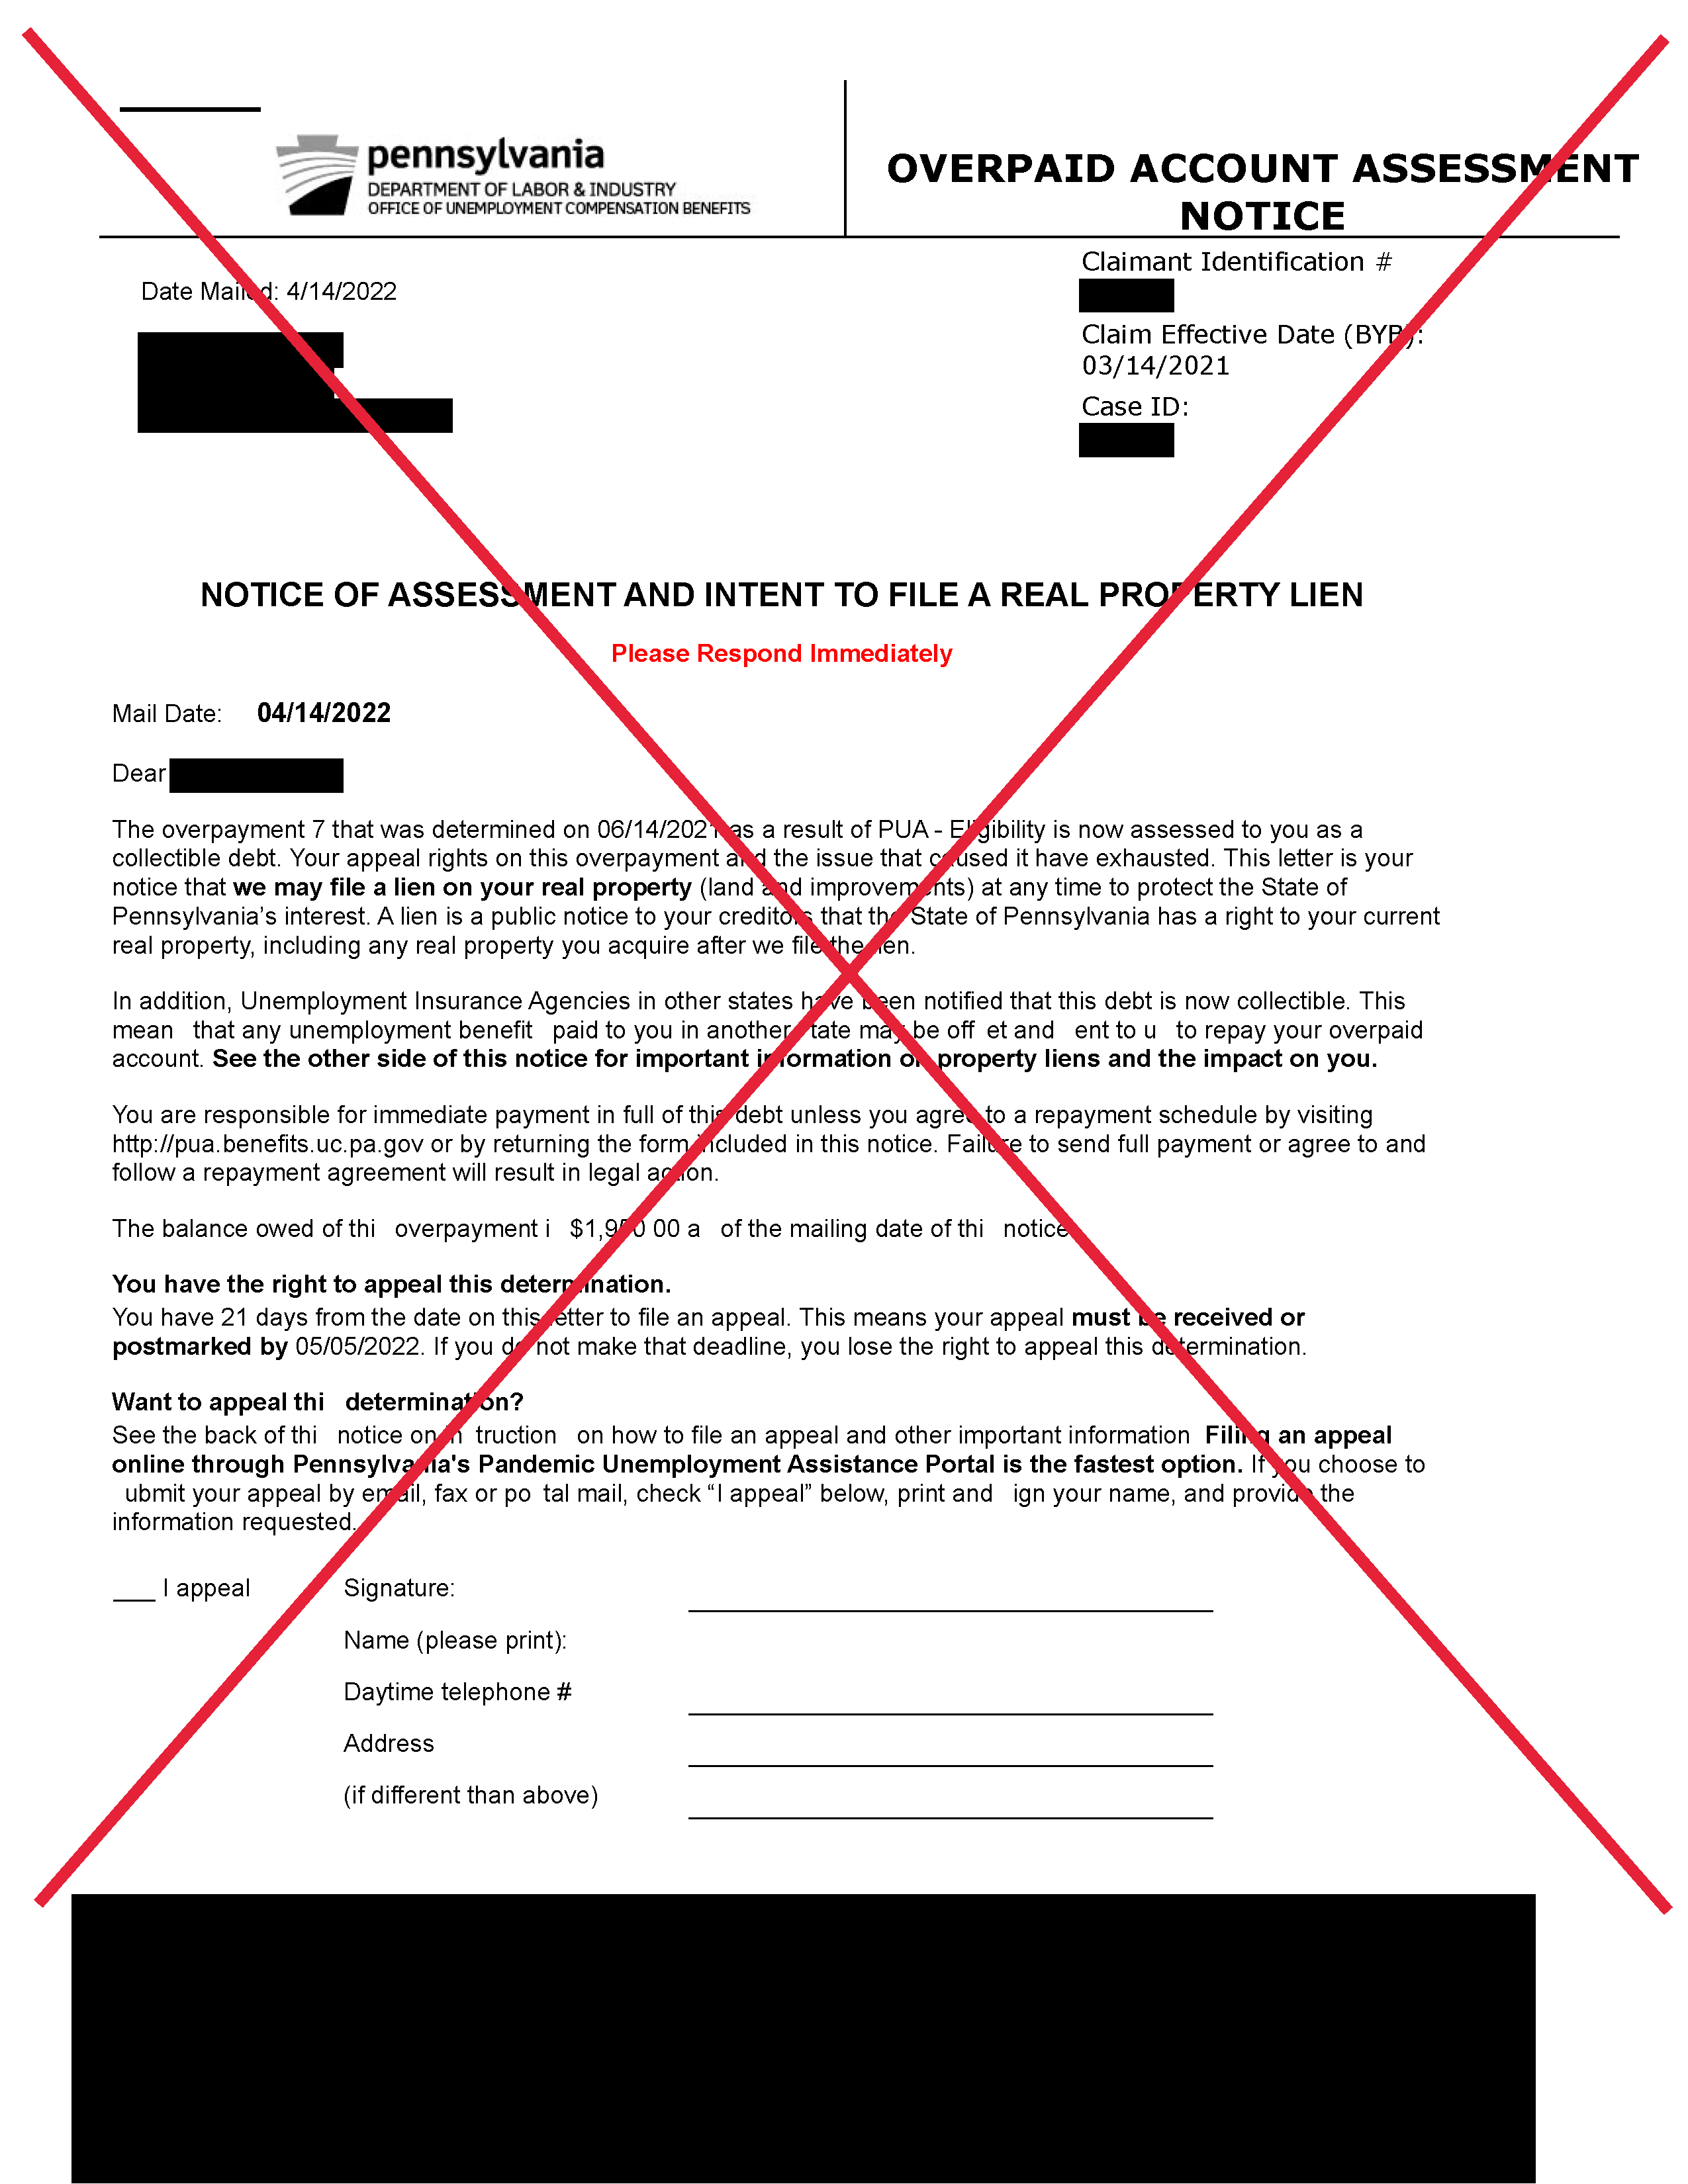 Example of the incorrect PUA lien notice.